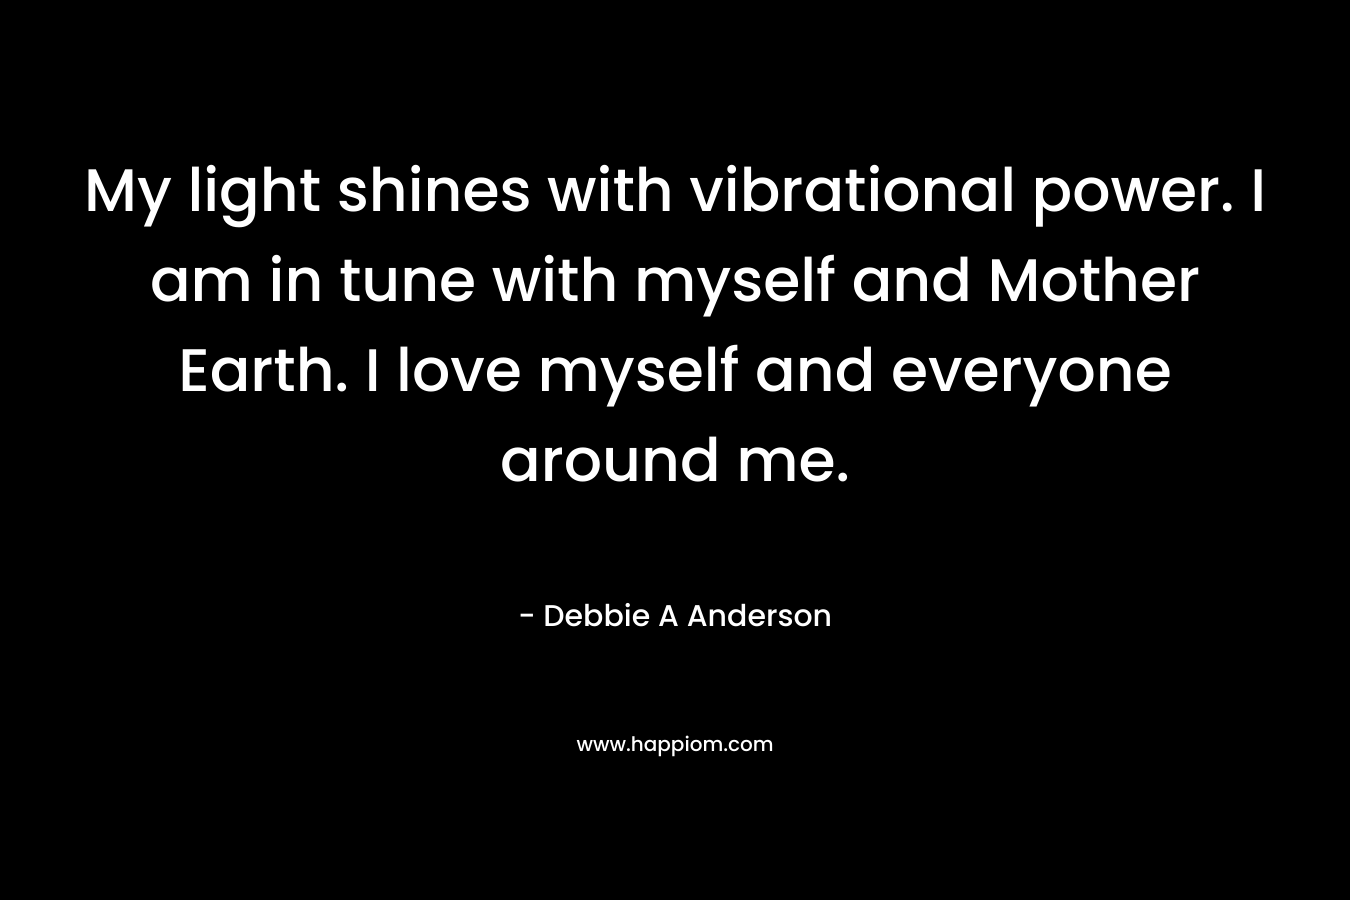 My light shines with vibrational power. I am in tune with myself and Mother Earth. I love myself and everyone around me.